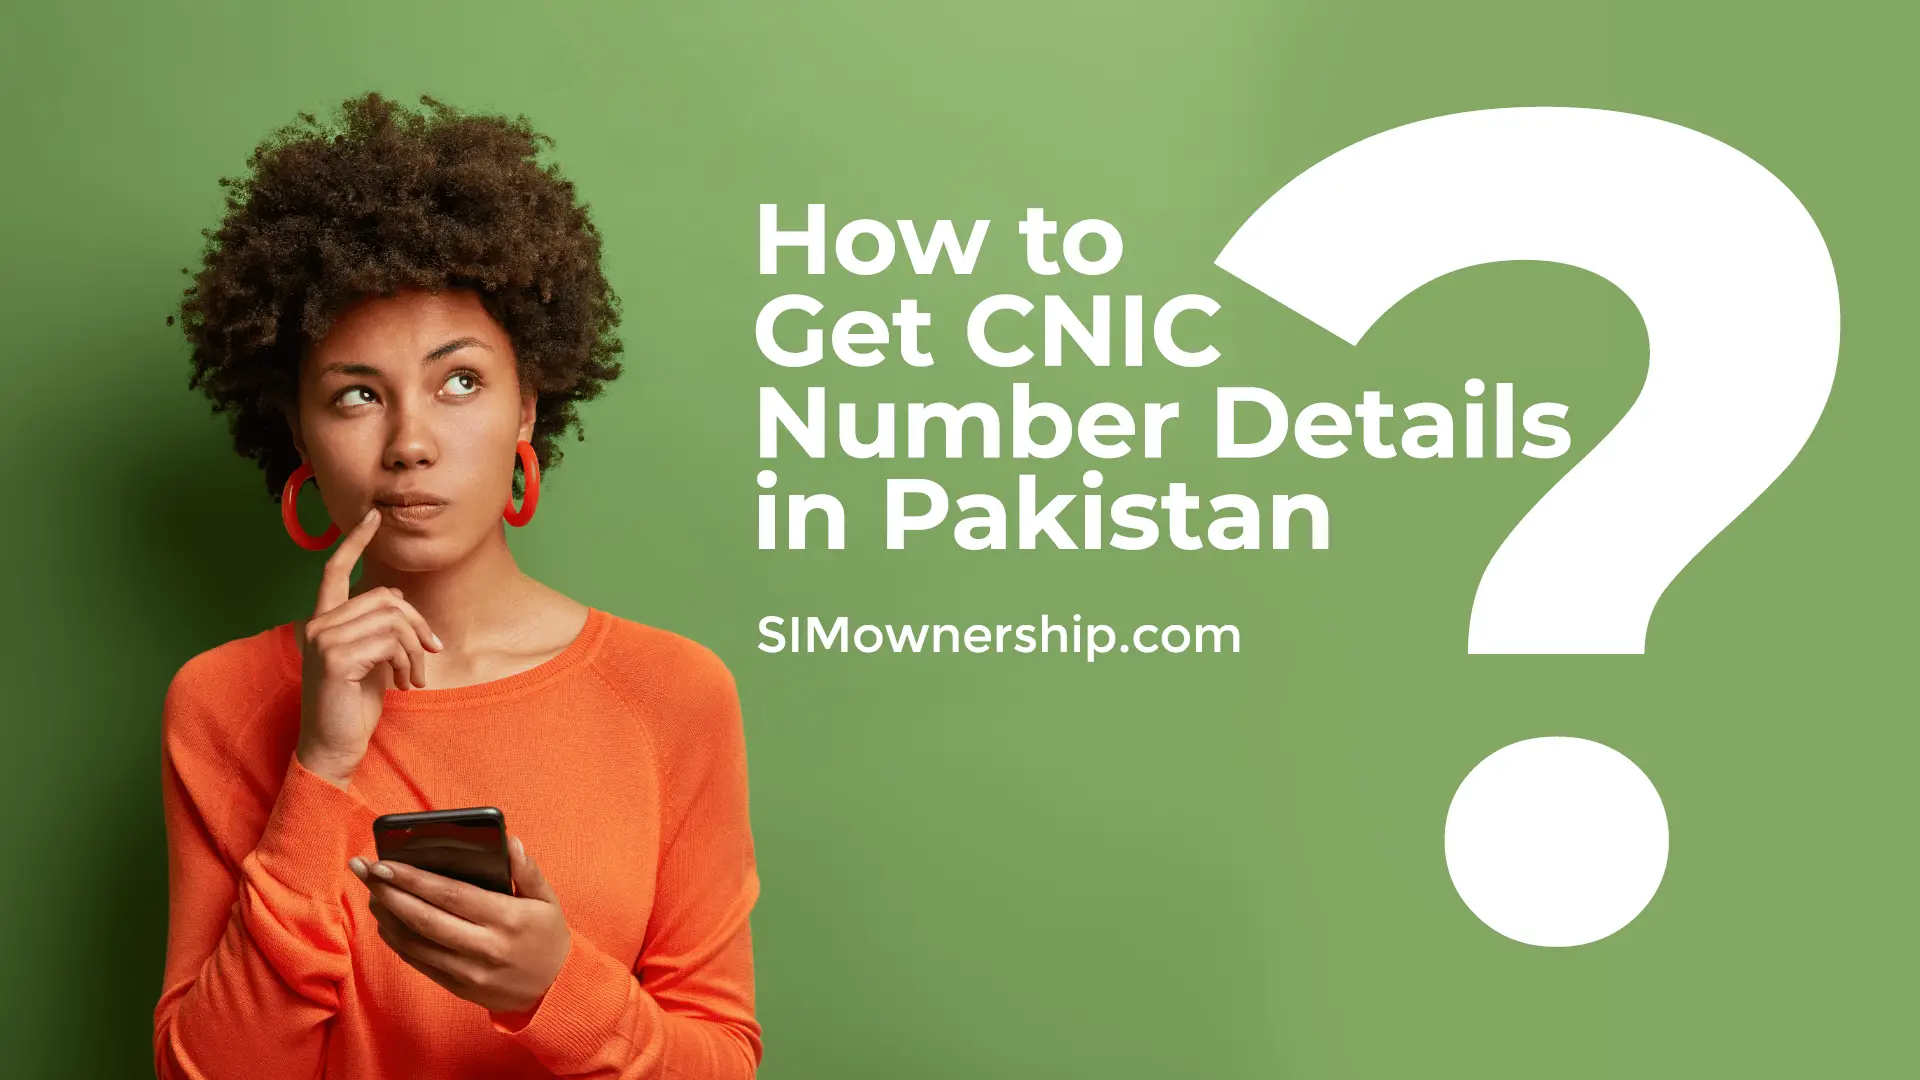 HOW TO GET CNIC NUMBER DETAILS IN PAKISTAN?